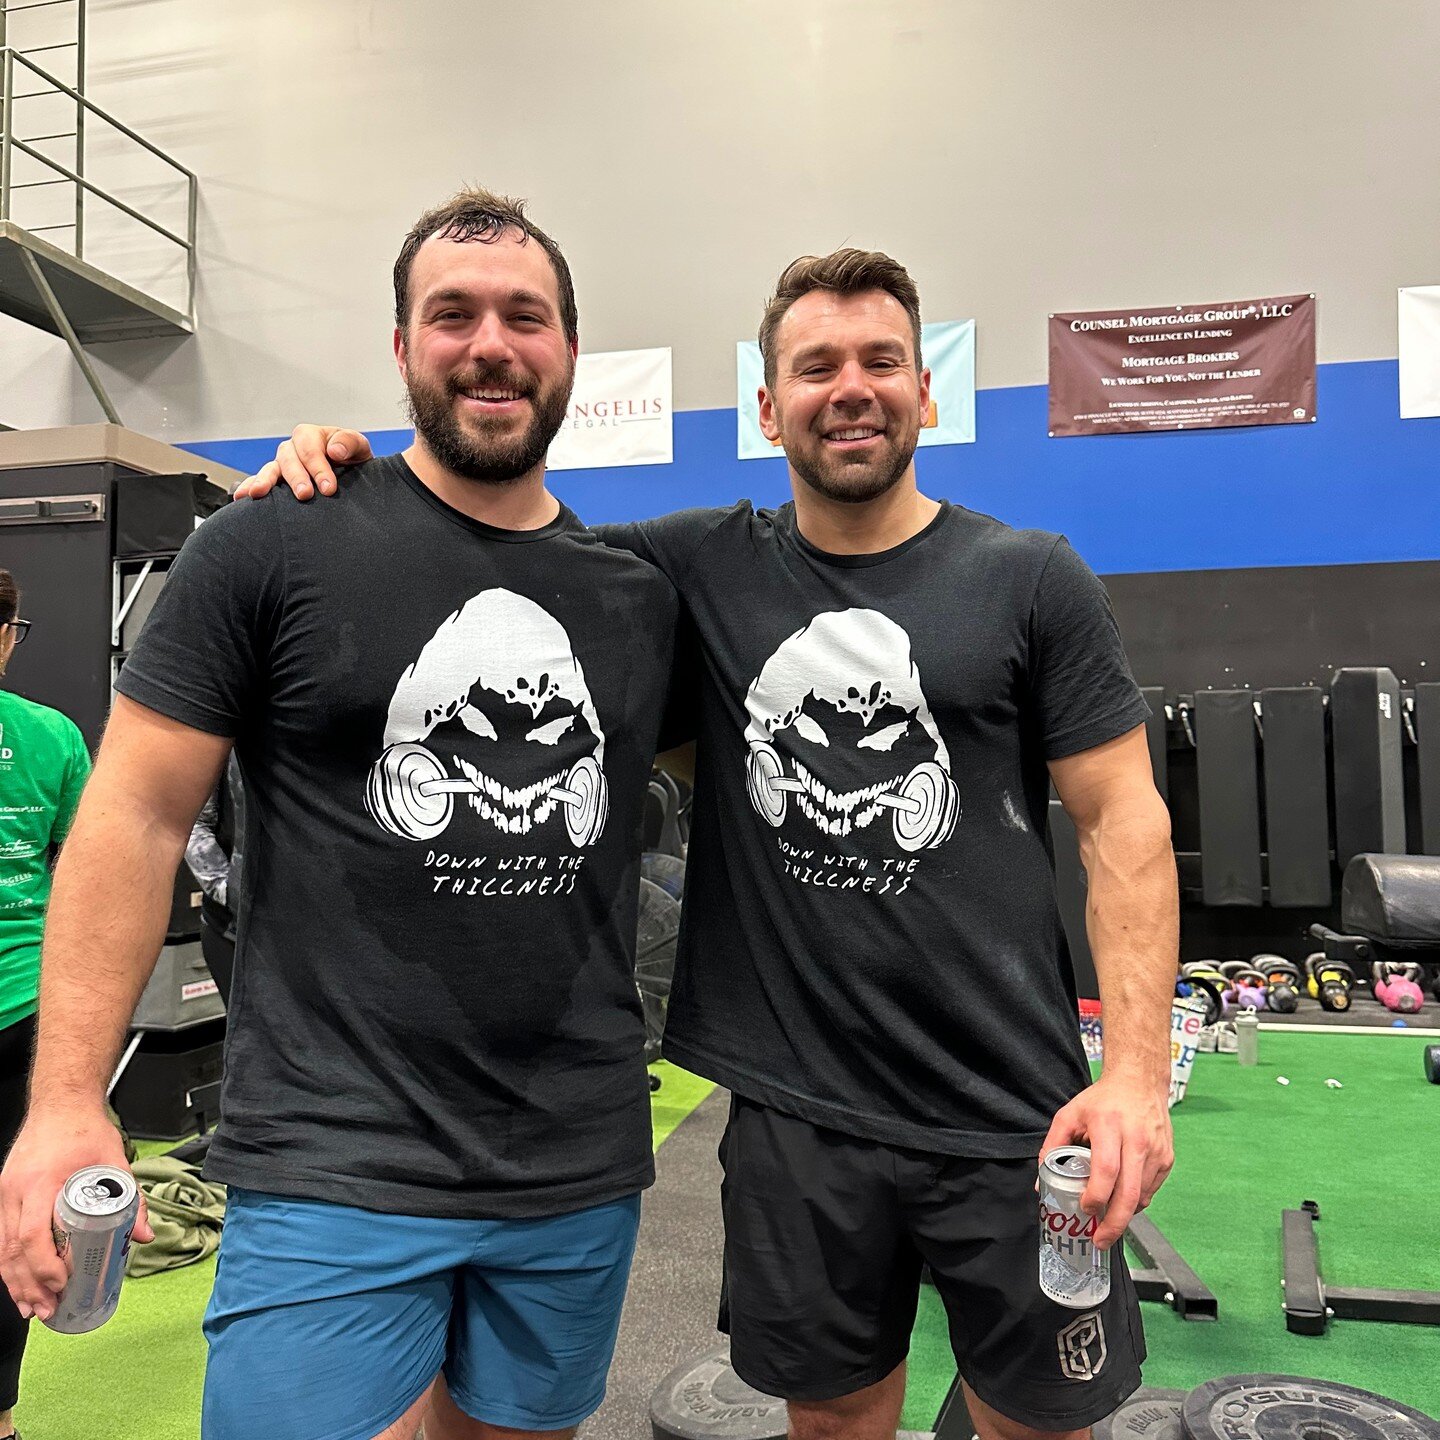 Throw back to when the Down with the Thiccness shirt was born! @dr_trent_dpt and @coltontrcic repped it as their team name for the Holiday Hero's Competition at @fortifiedfitnessaz in 2022.